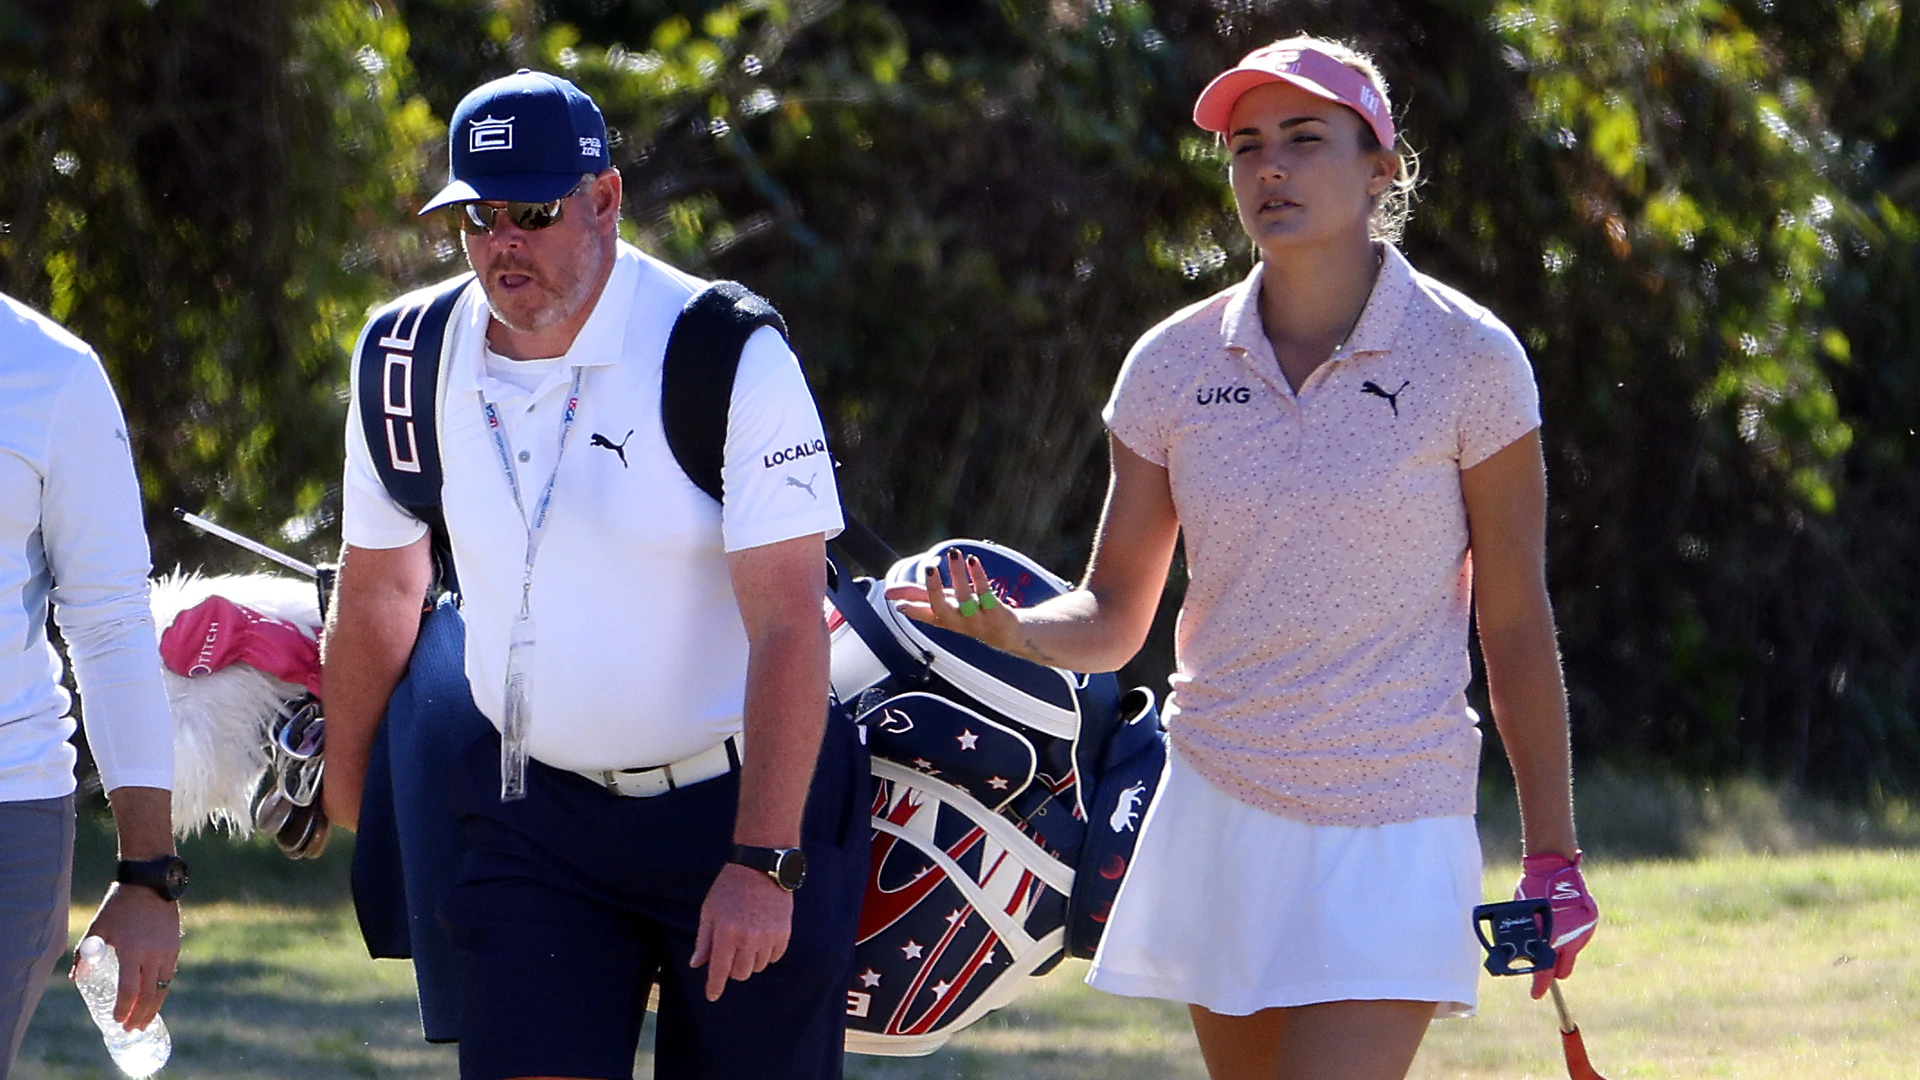 With new caddie and putter, Lexi Thompson looks to start new trend at U.S. Women’s Open